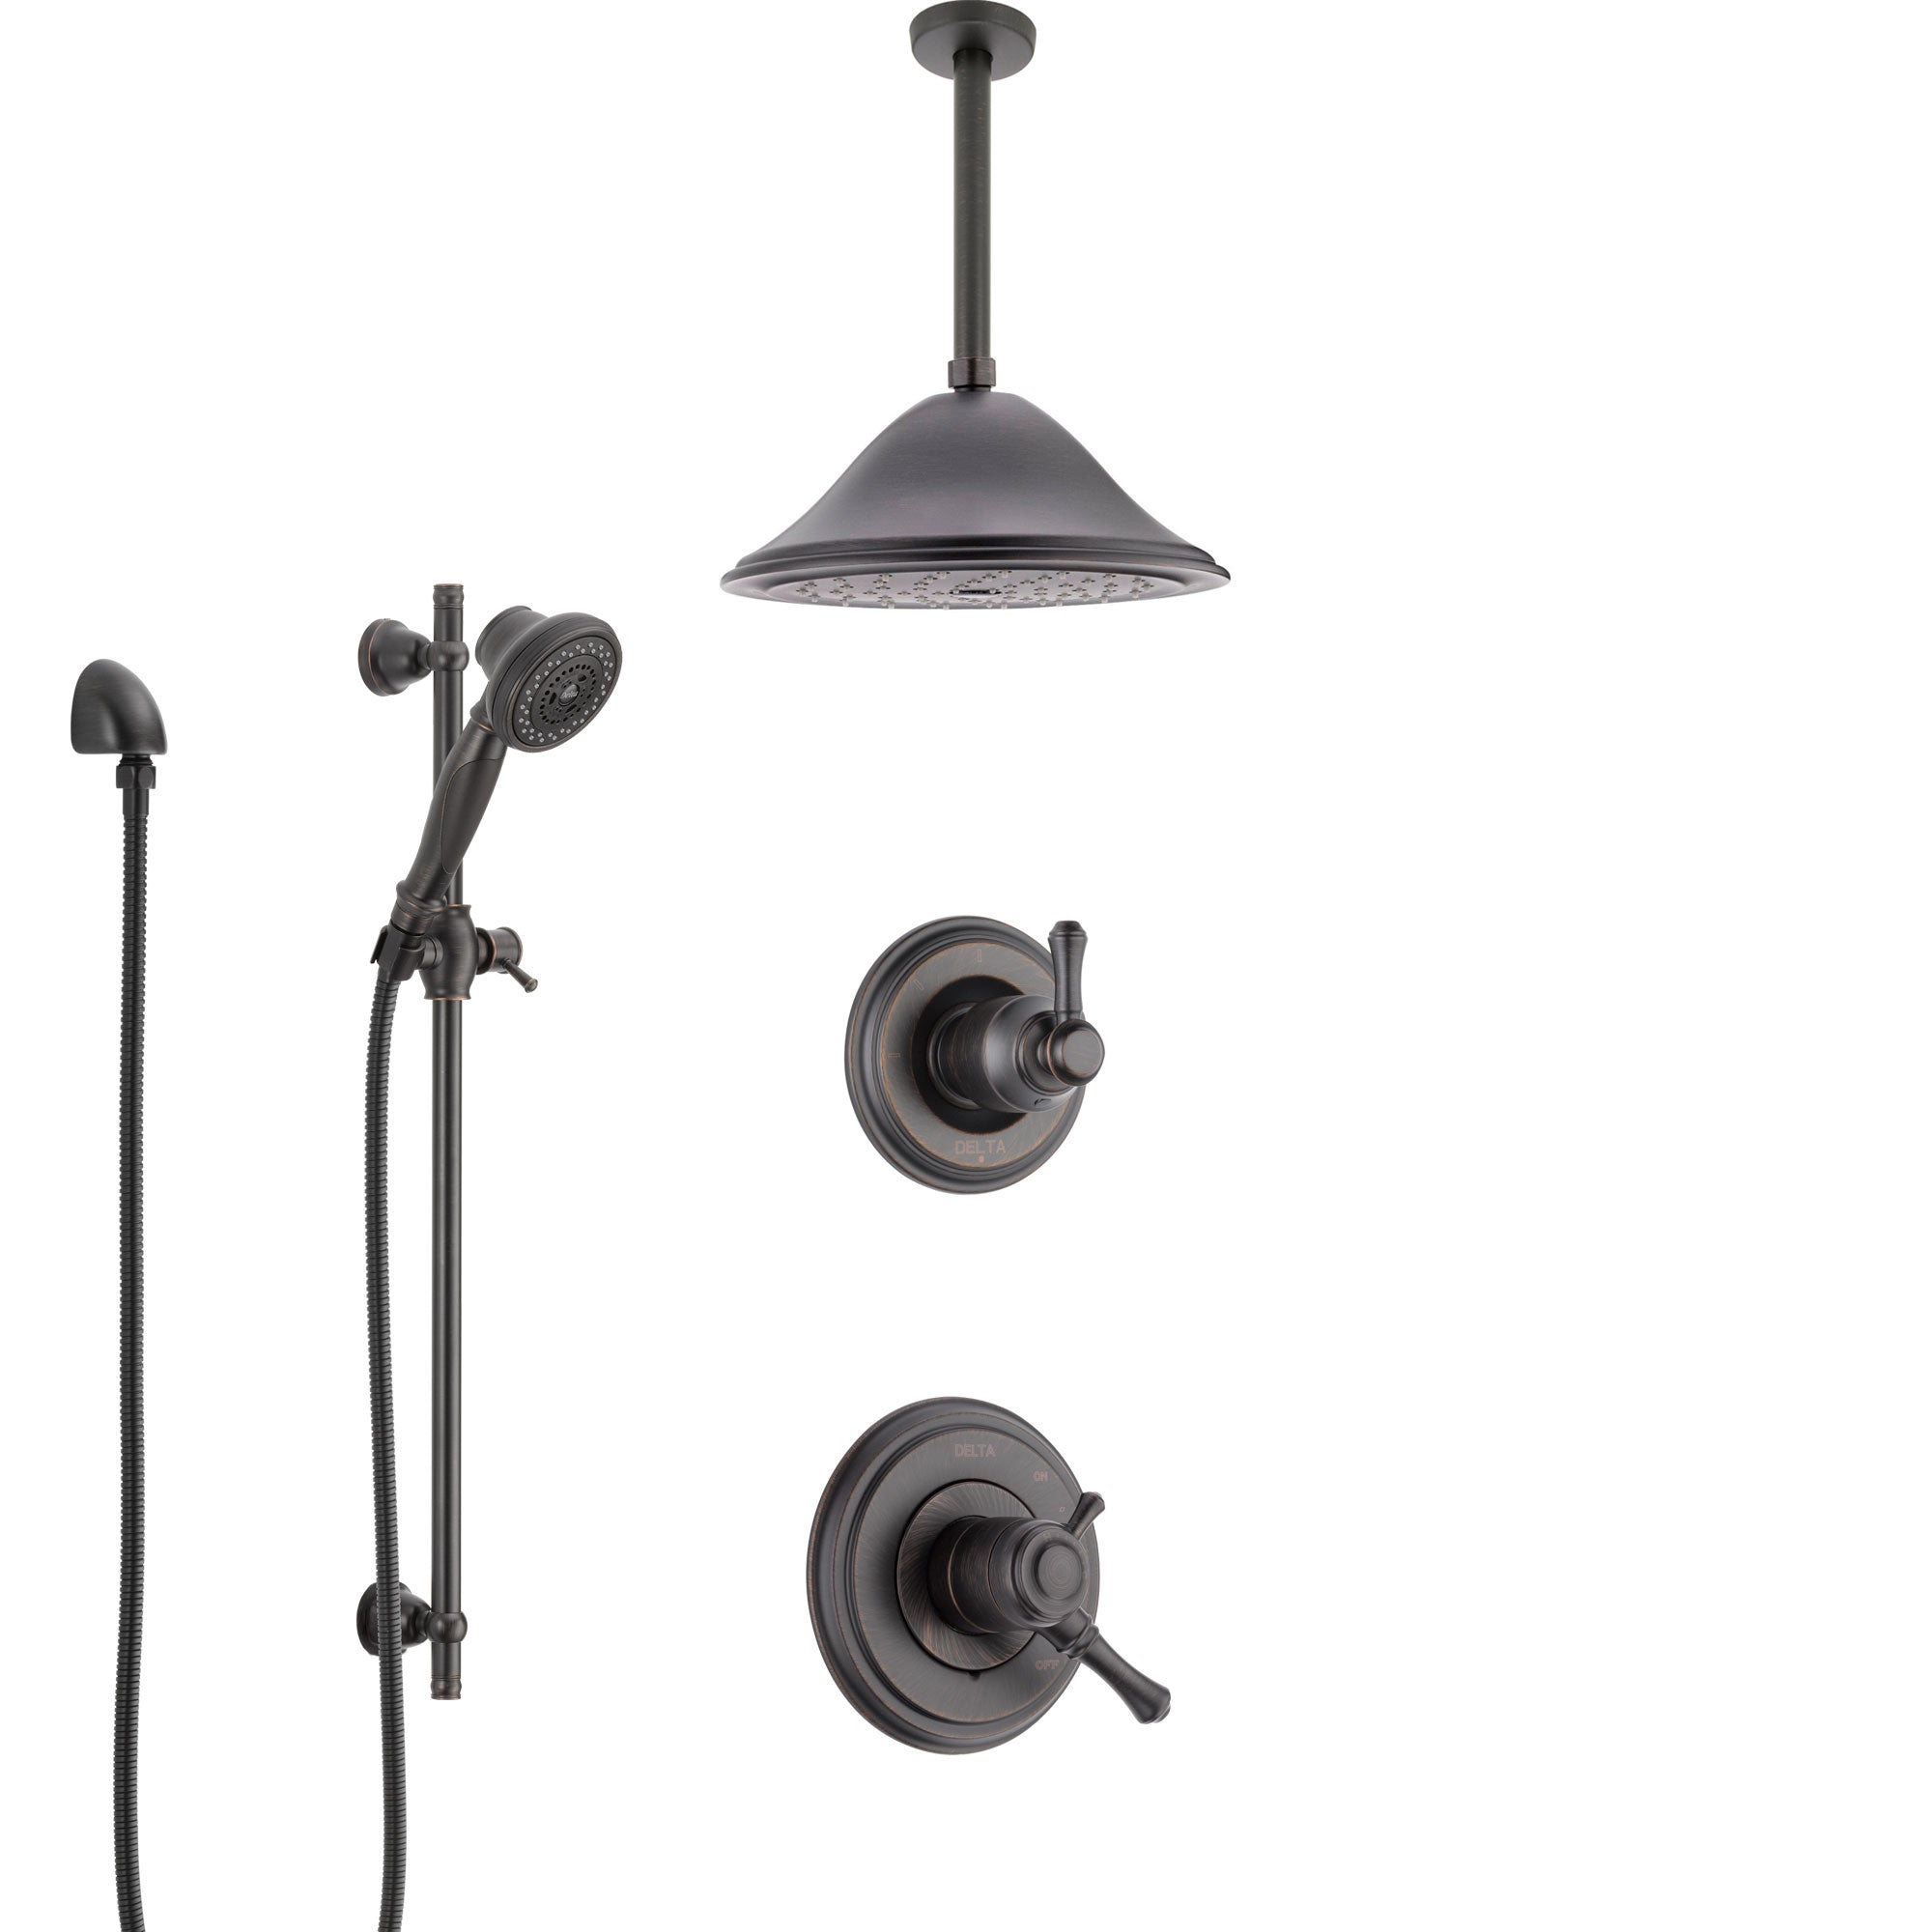 Delta Cassidy Venetian Bronze Shower System with Dual Control Handle, Diverter, Ceiling Mount Showerhead, and Hand Shower with Slidebar SS1797RB4